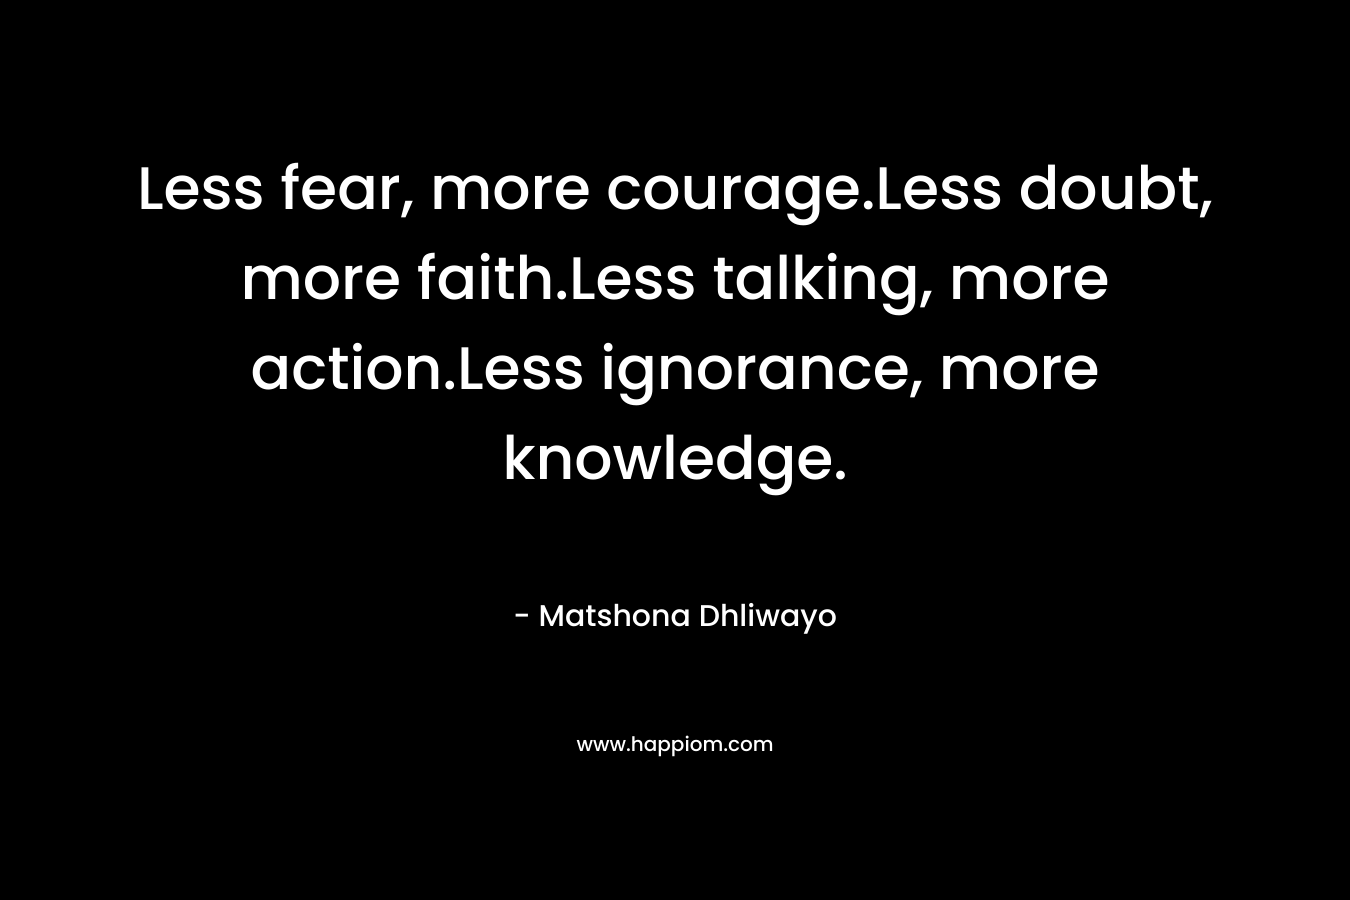 Less fear, more courage.Less doubt, more faith.Less talking, more action.Less ignorance, more knowledge.